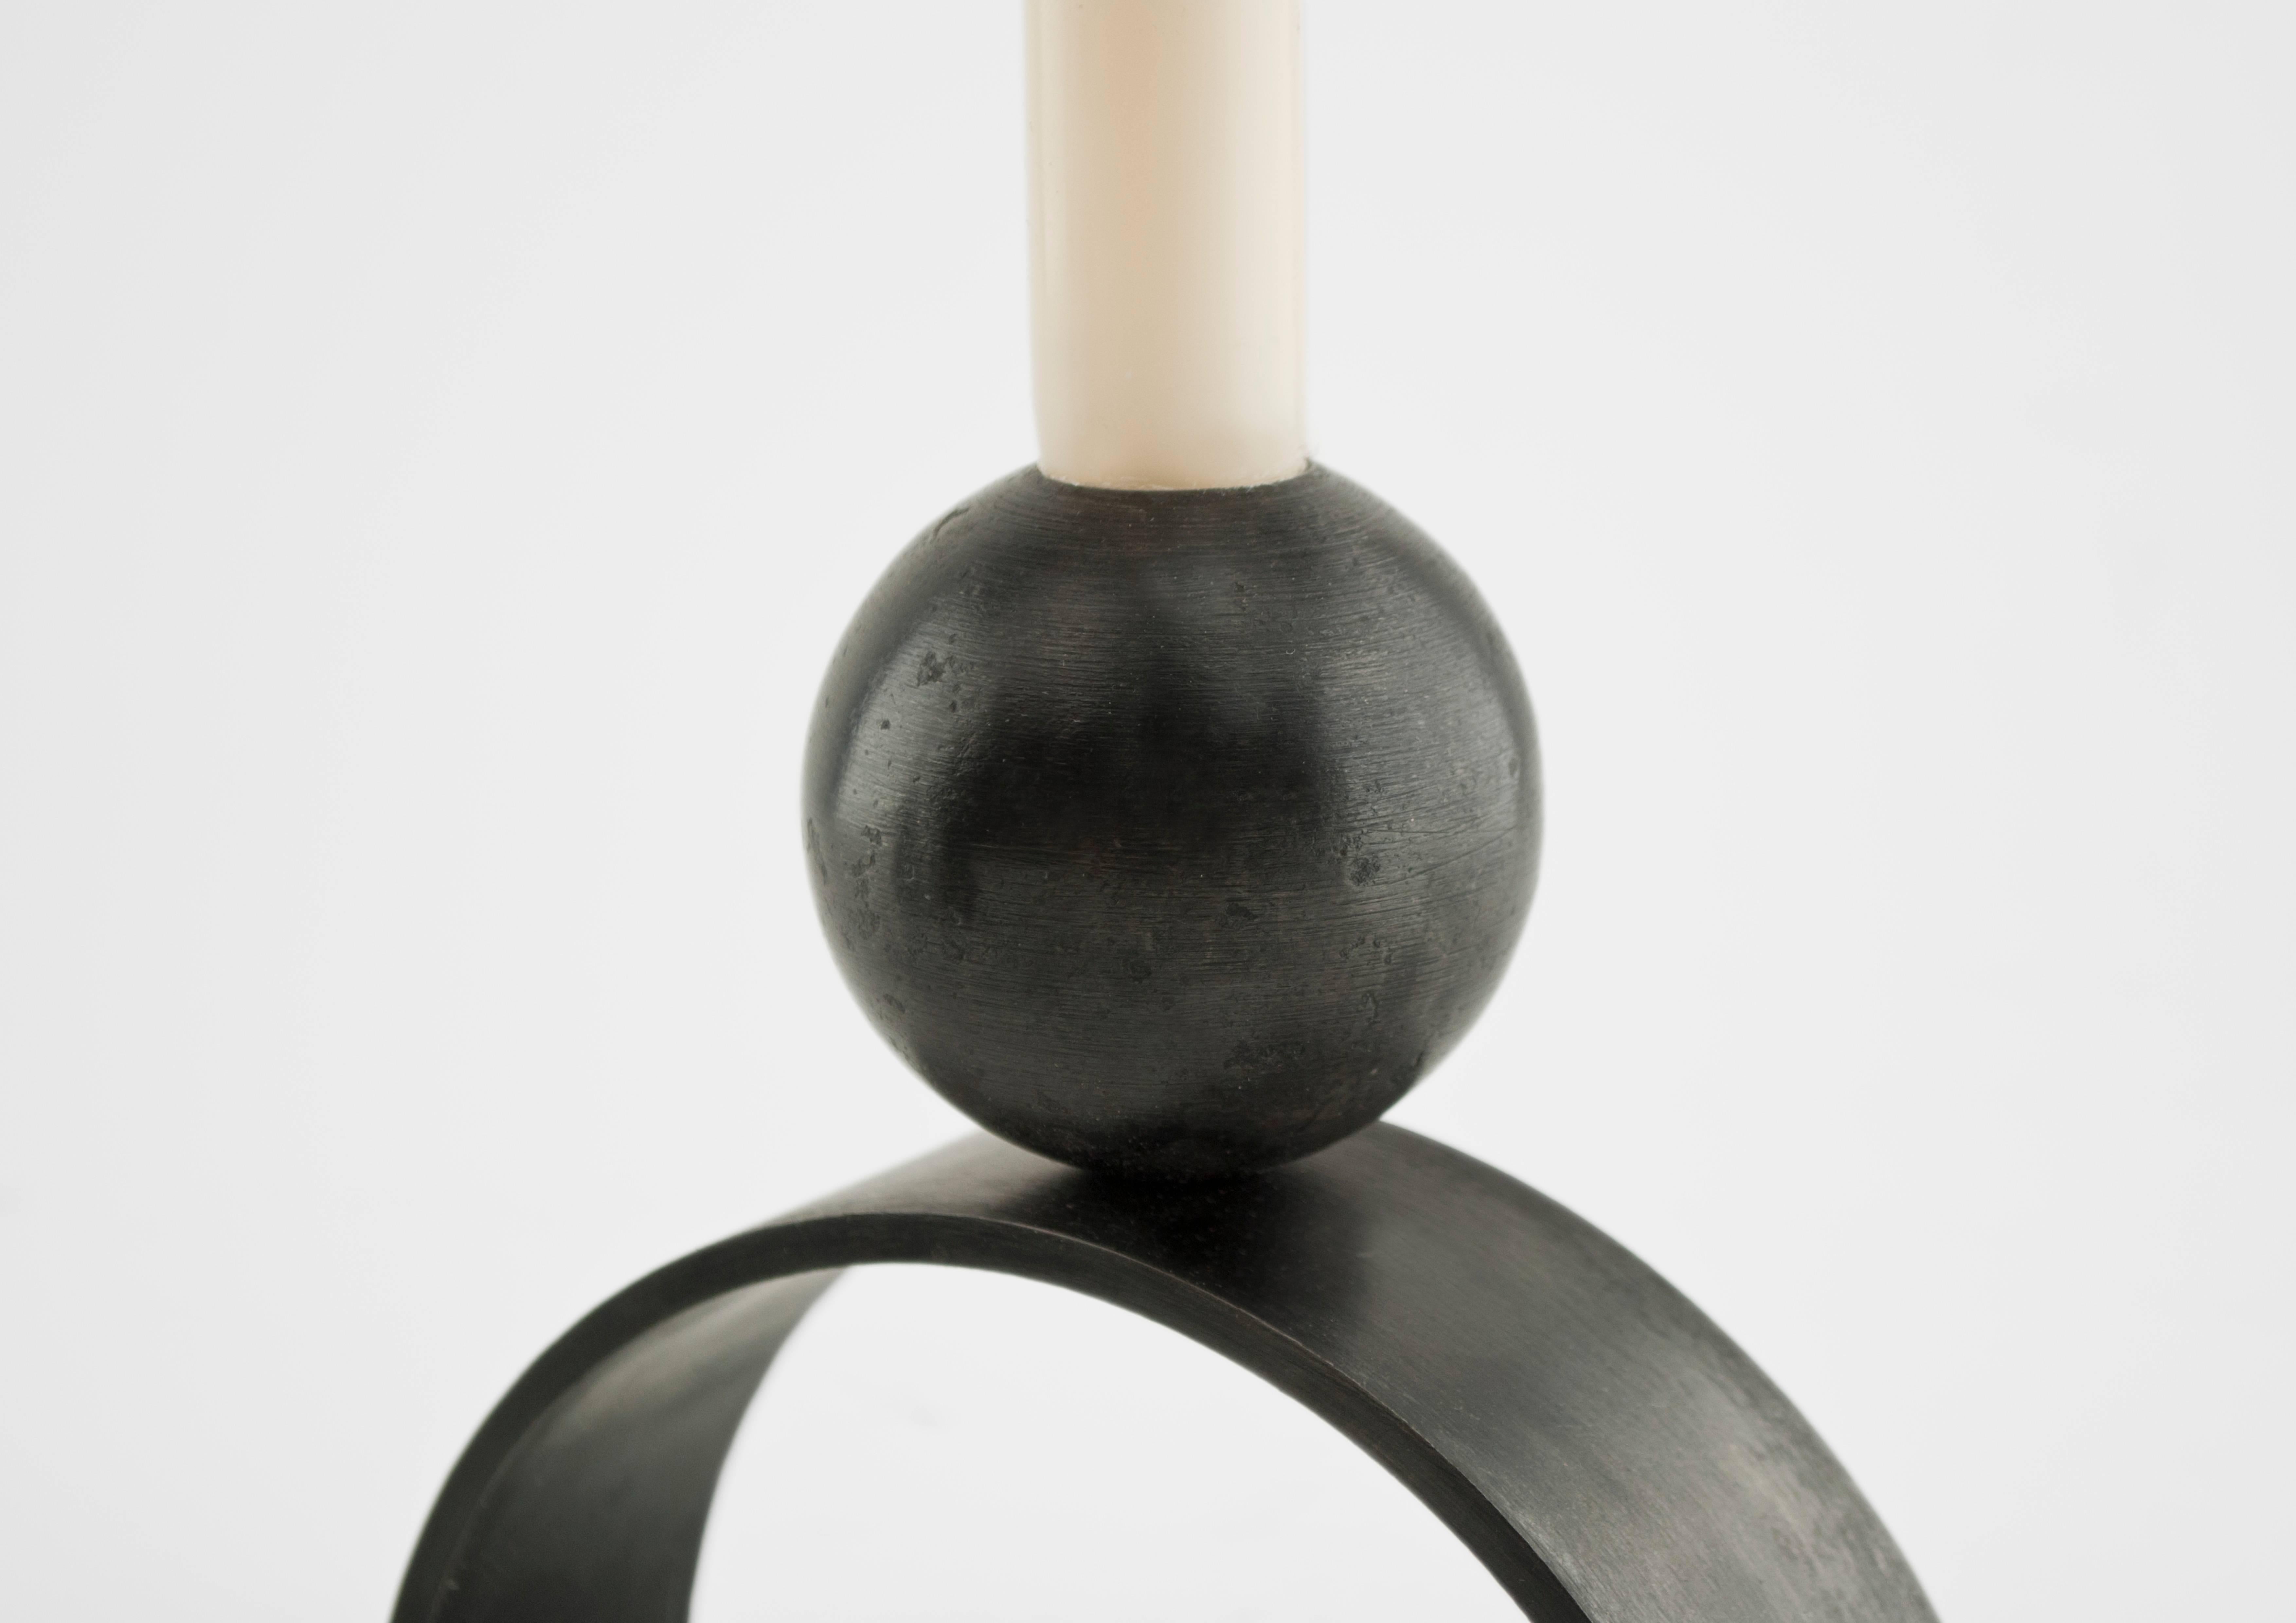 Louis Jobst' arch and ball candleholders are little monuments to have in the home. The form derives from paintings by Jobst of monumental shapes and forms.

Each candle stick holder is handmade from mild steel and patinated black. The contemporary